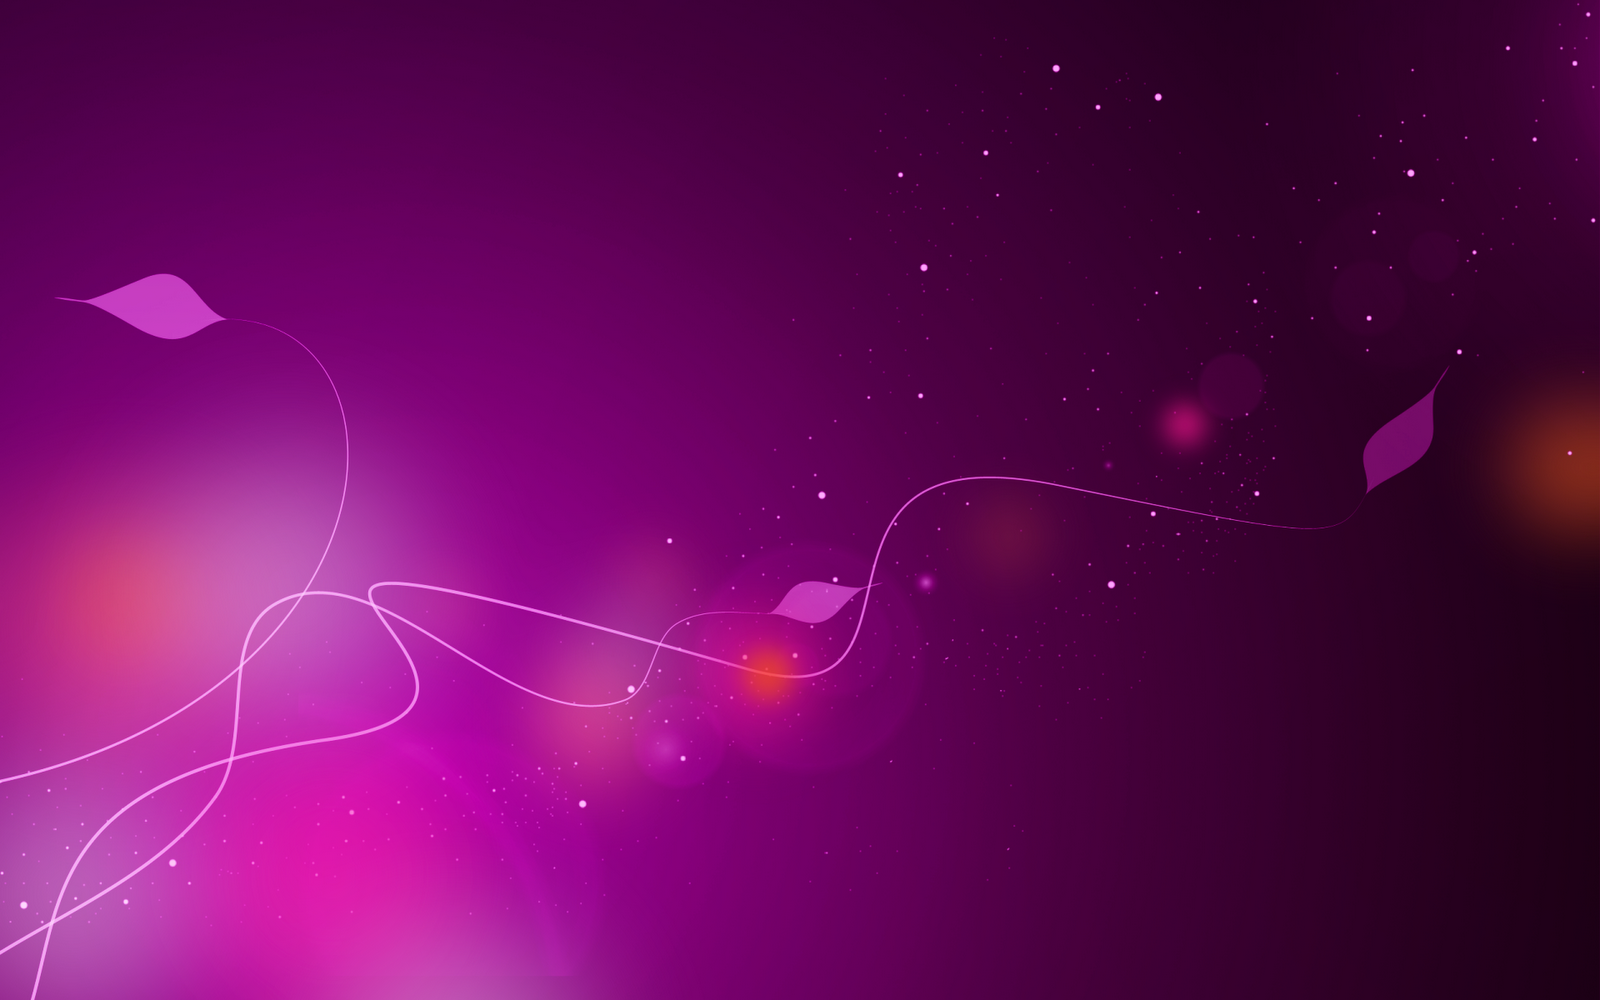 Aesthetic Purple Wallpapers Background Wallpaper Image For Free Download   Pngtree